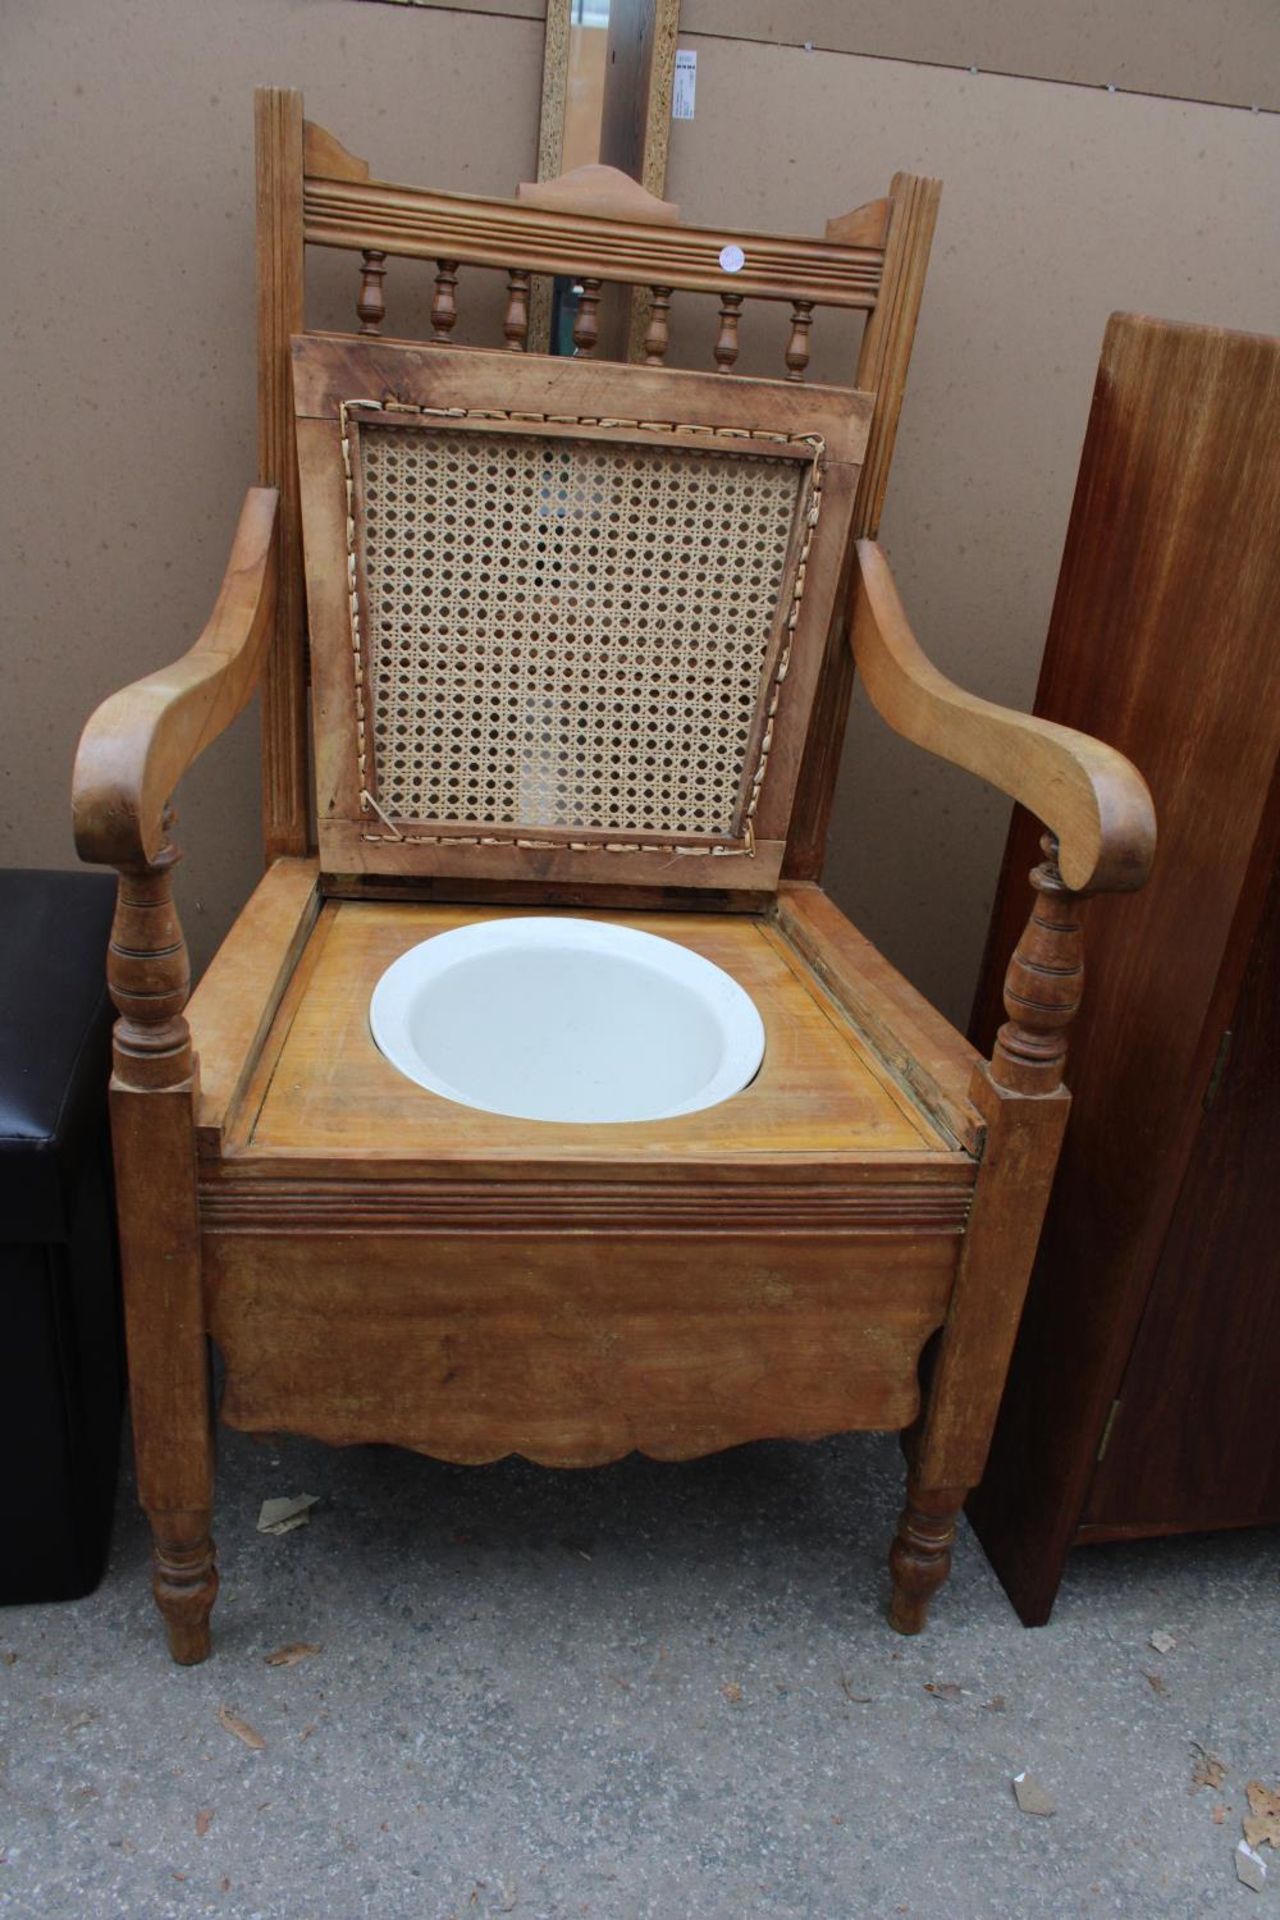 A LATE VICTORIAN COMMODE CHAIR - Image 2 of 2